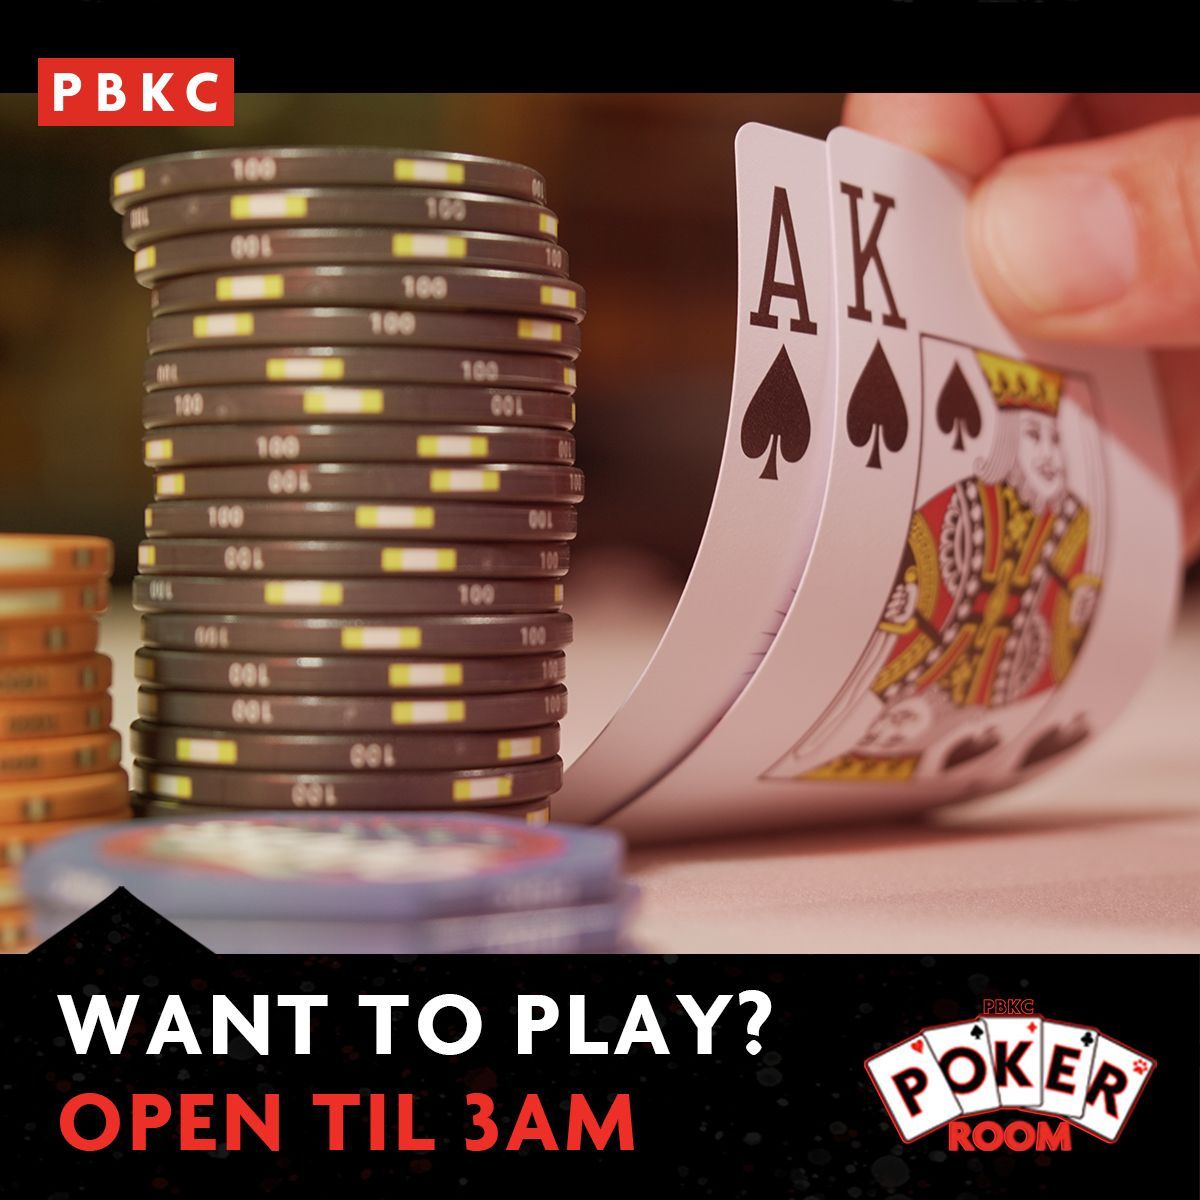 Want to Play? Come play poker at the Action Palace! Open till 3am! buff.ly/46RaWpW #poker #pokertournament #tablegames #westpalmbeach #southflorida #open